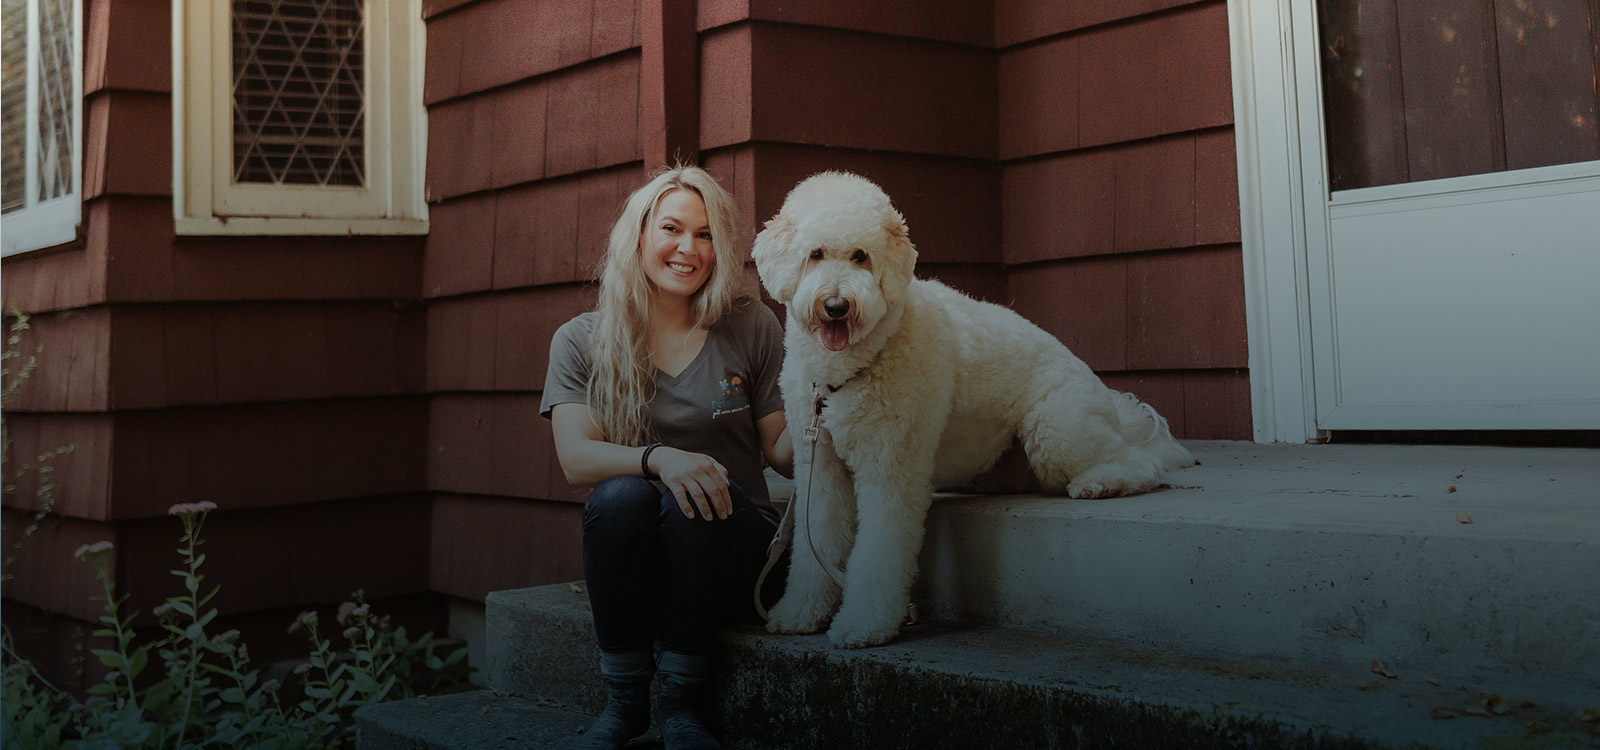 Pet Sitting Services in Langley, BC and Kamloops